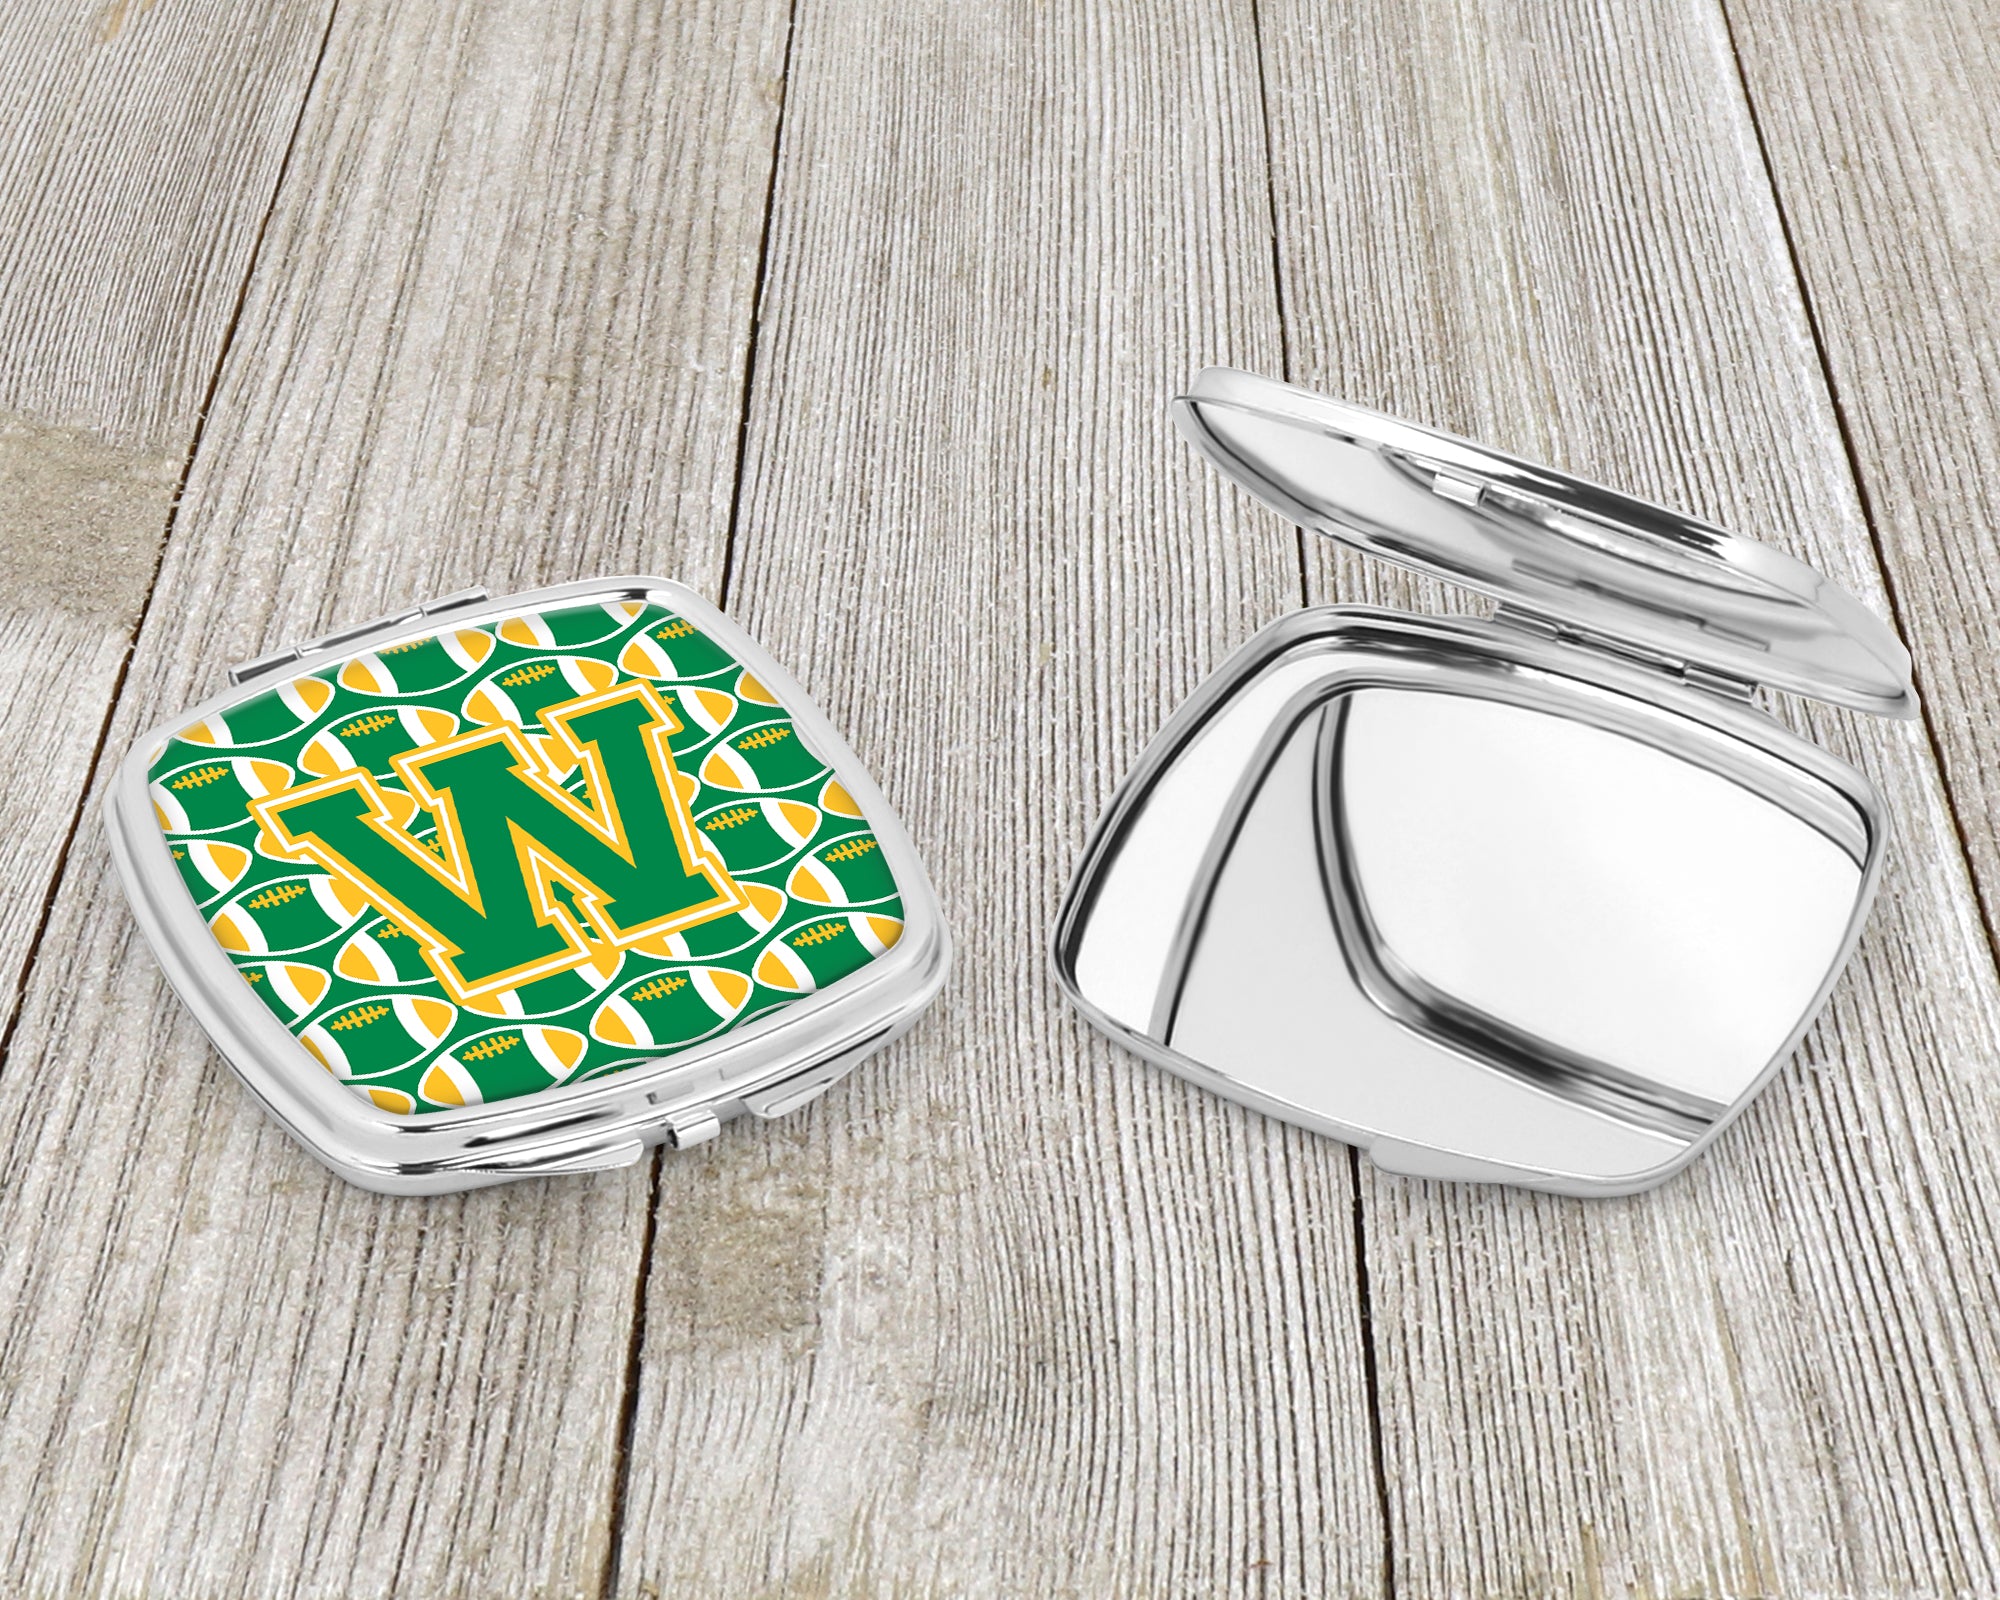 Letter W Football Green and Gold Compact Mirror CJ1069-WSCM  the-store.com.